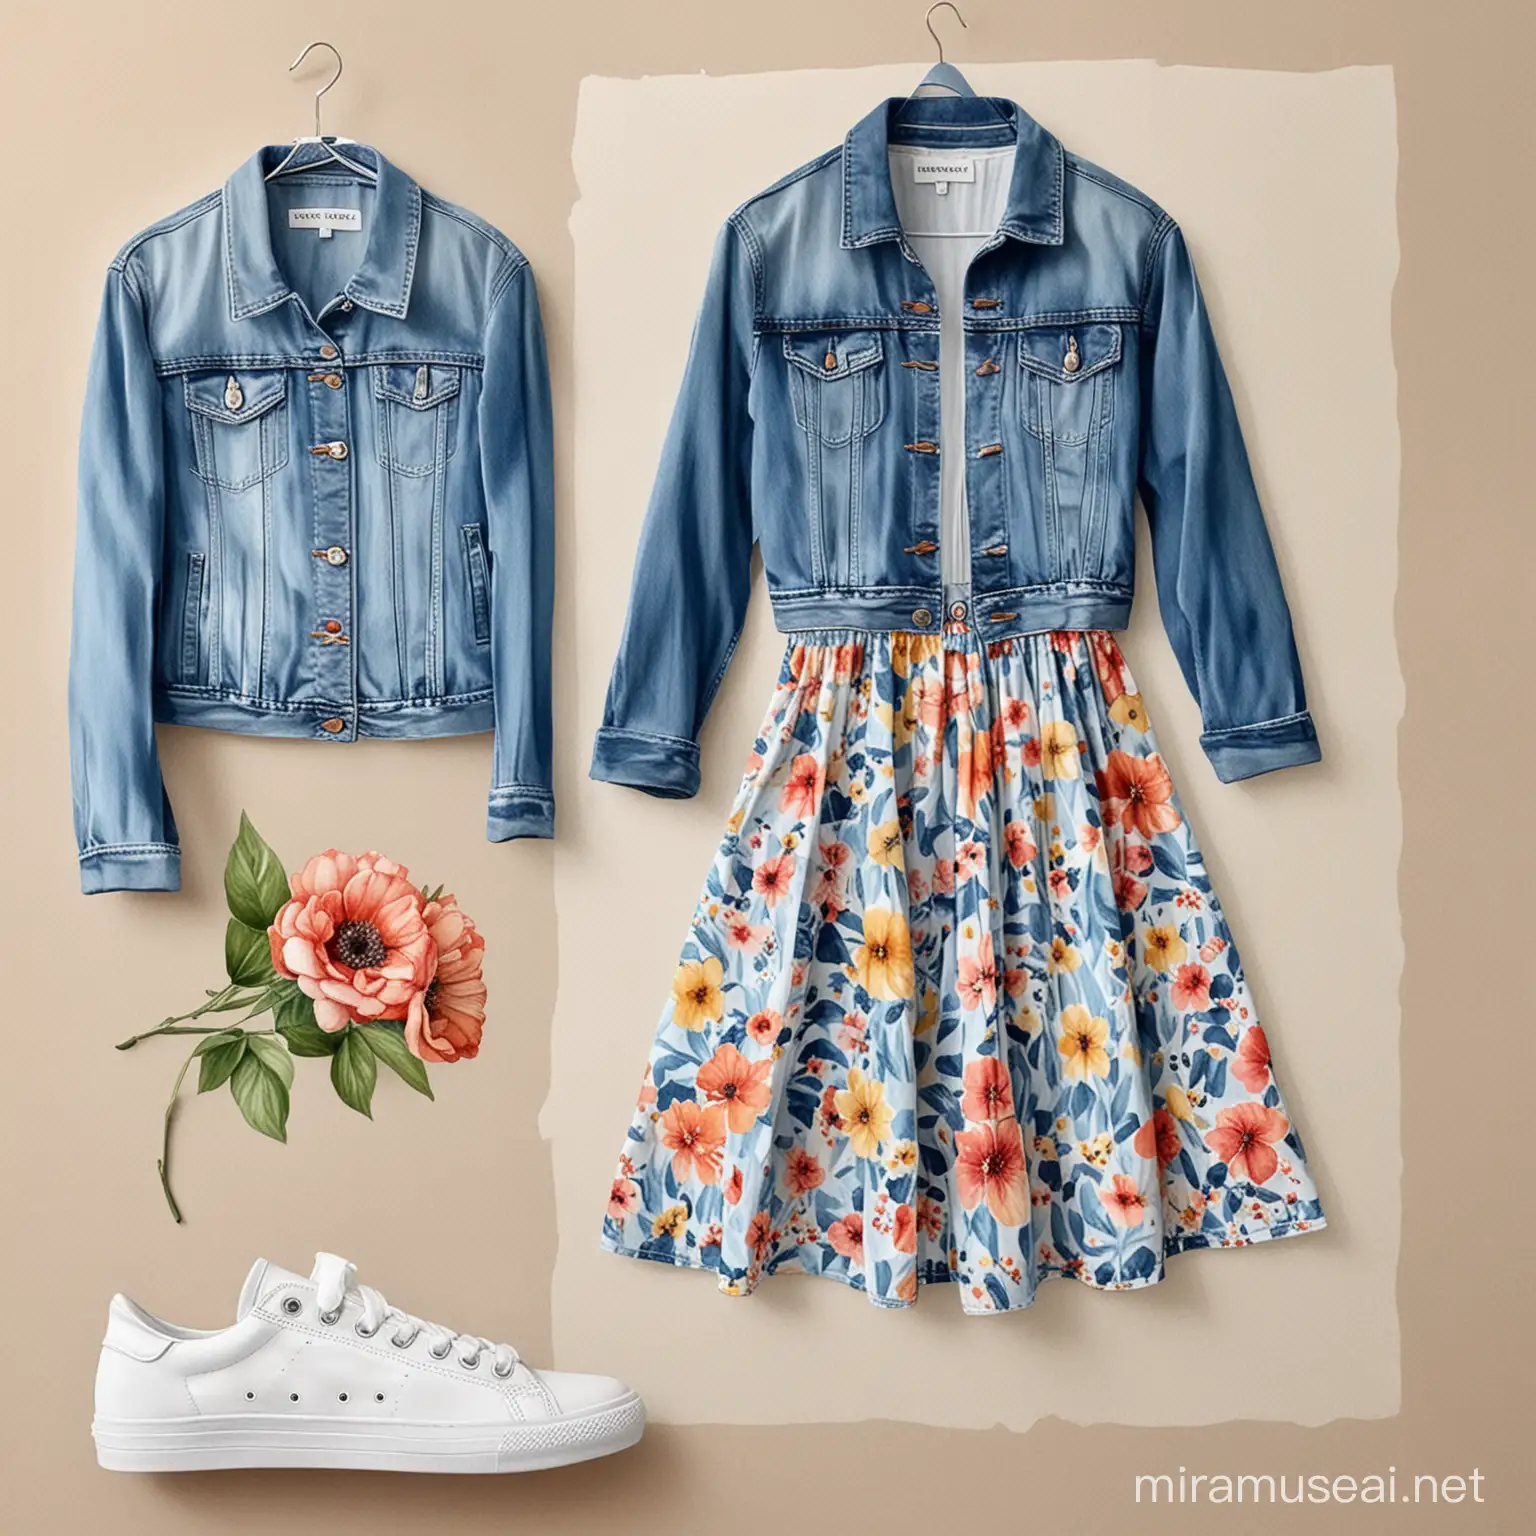 Chic Floral Midaxi Dress with Denim Jacket and White Sneakers Fashion Illustration